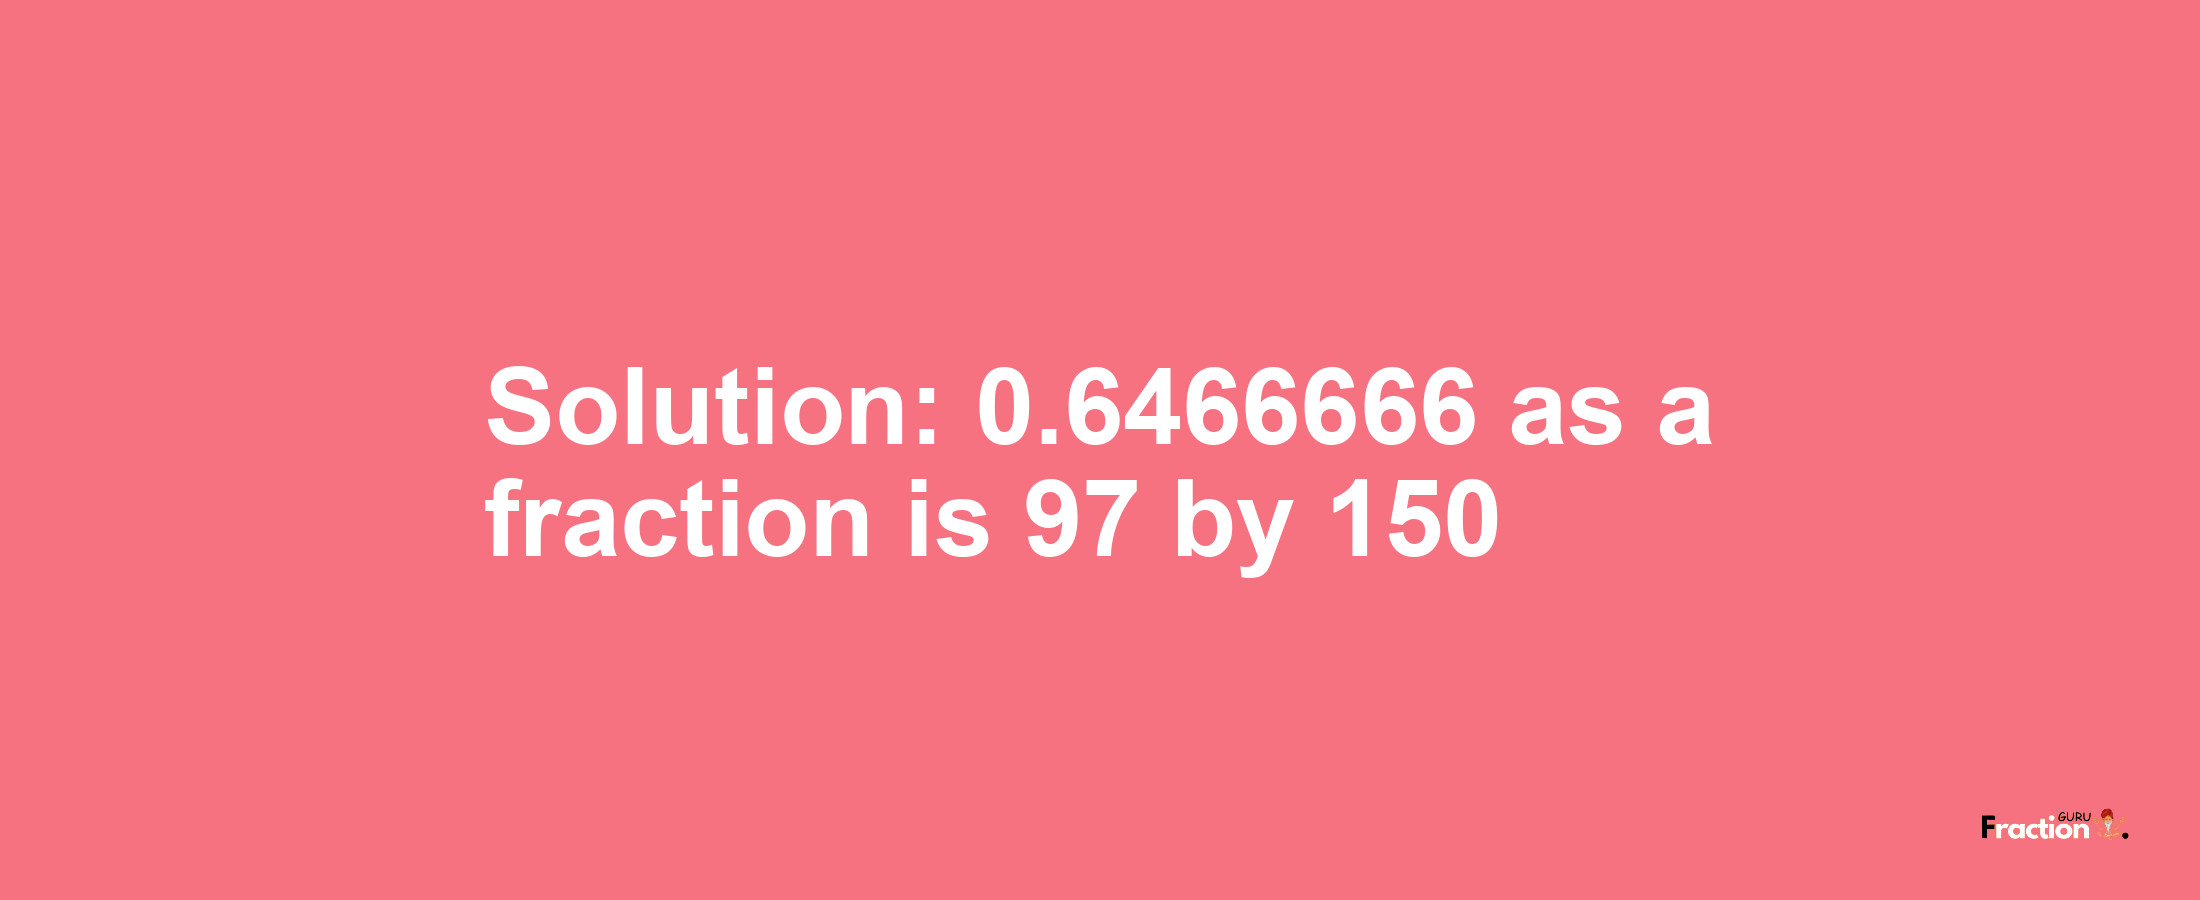 Solution:0.6466666 as a fraction is 97/150